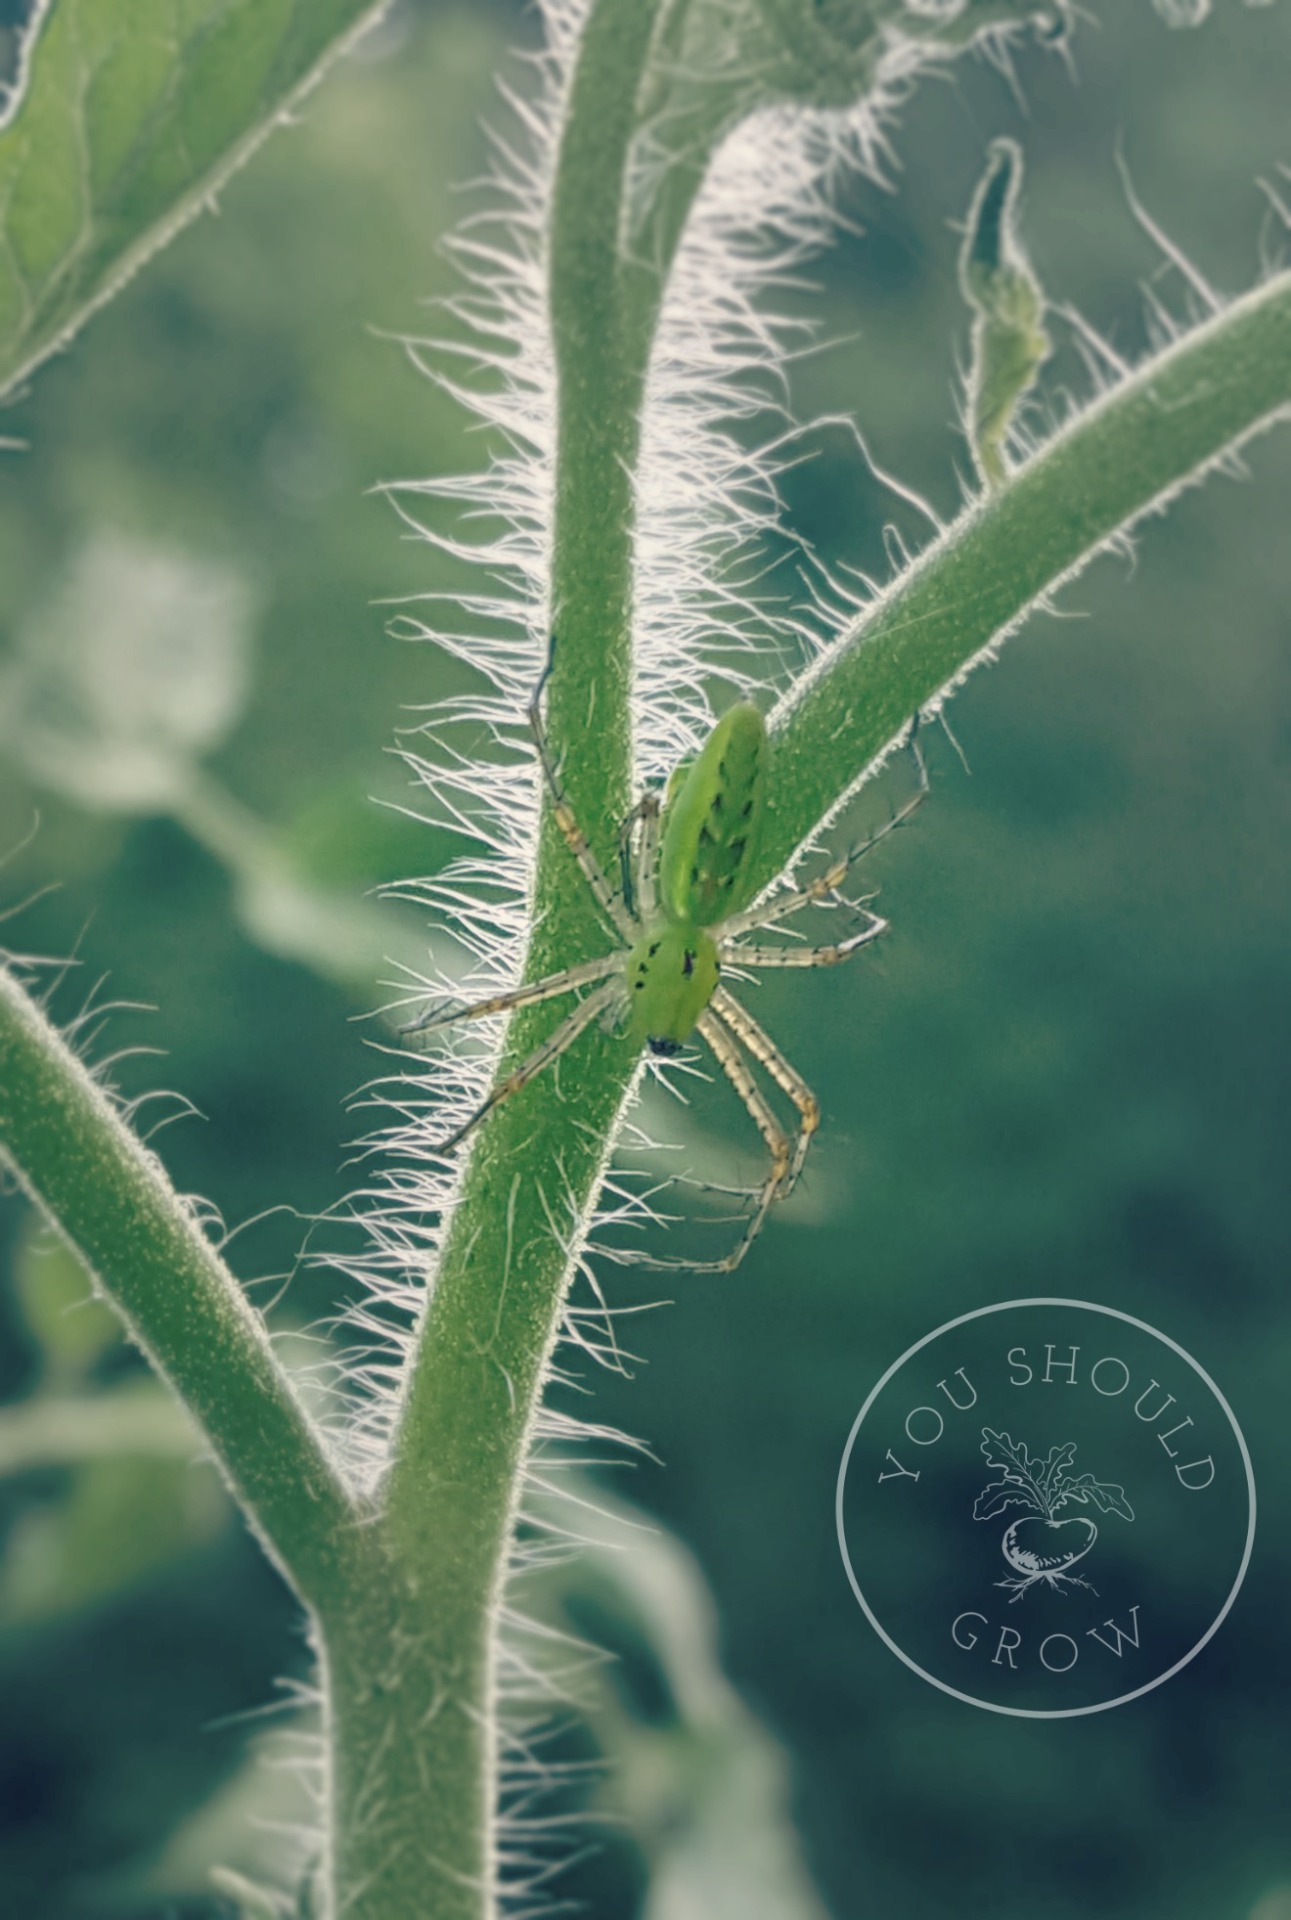 Gorgeous green lynx spider perched on a tomato plant.